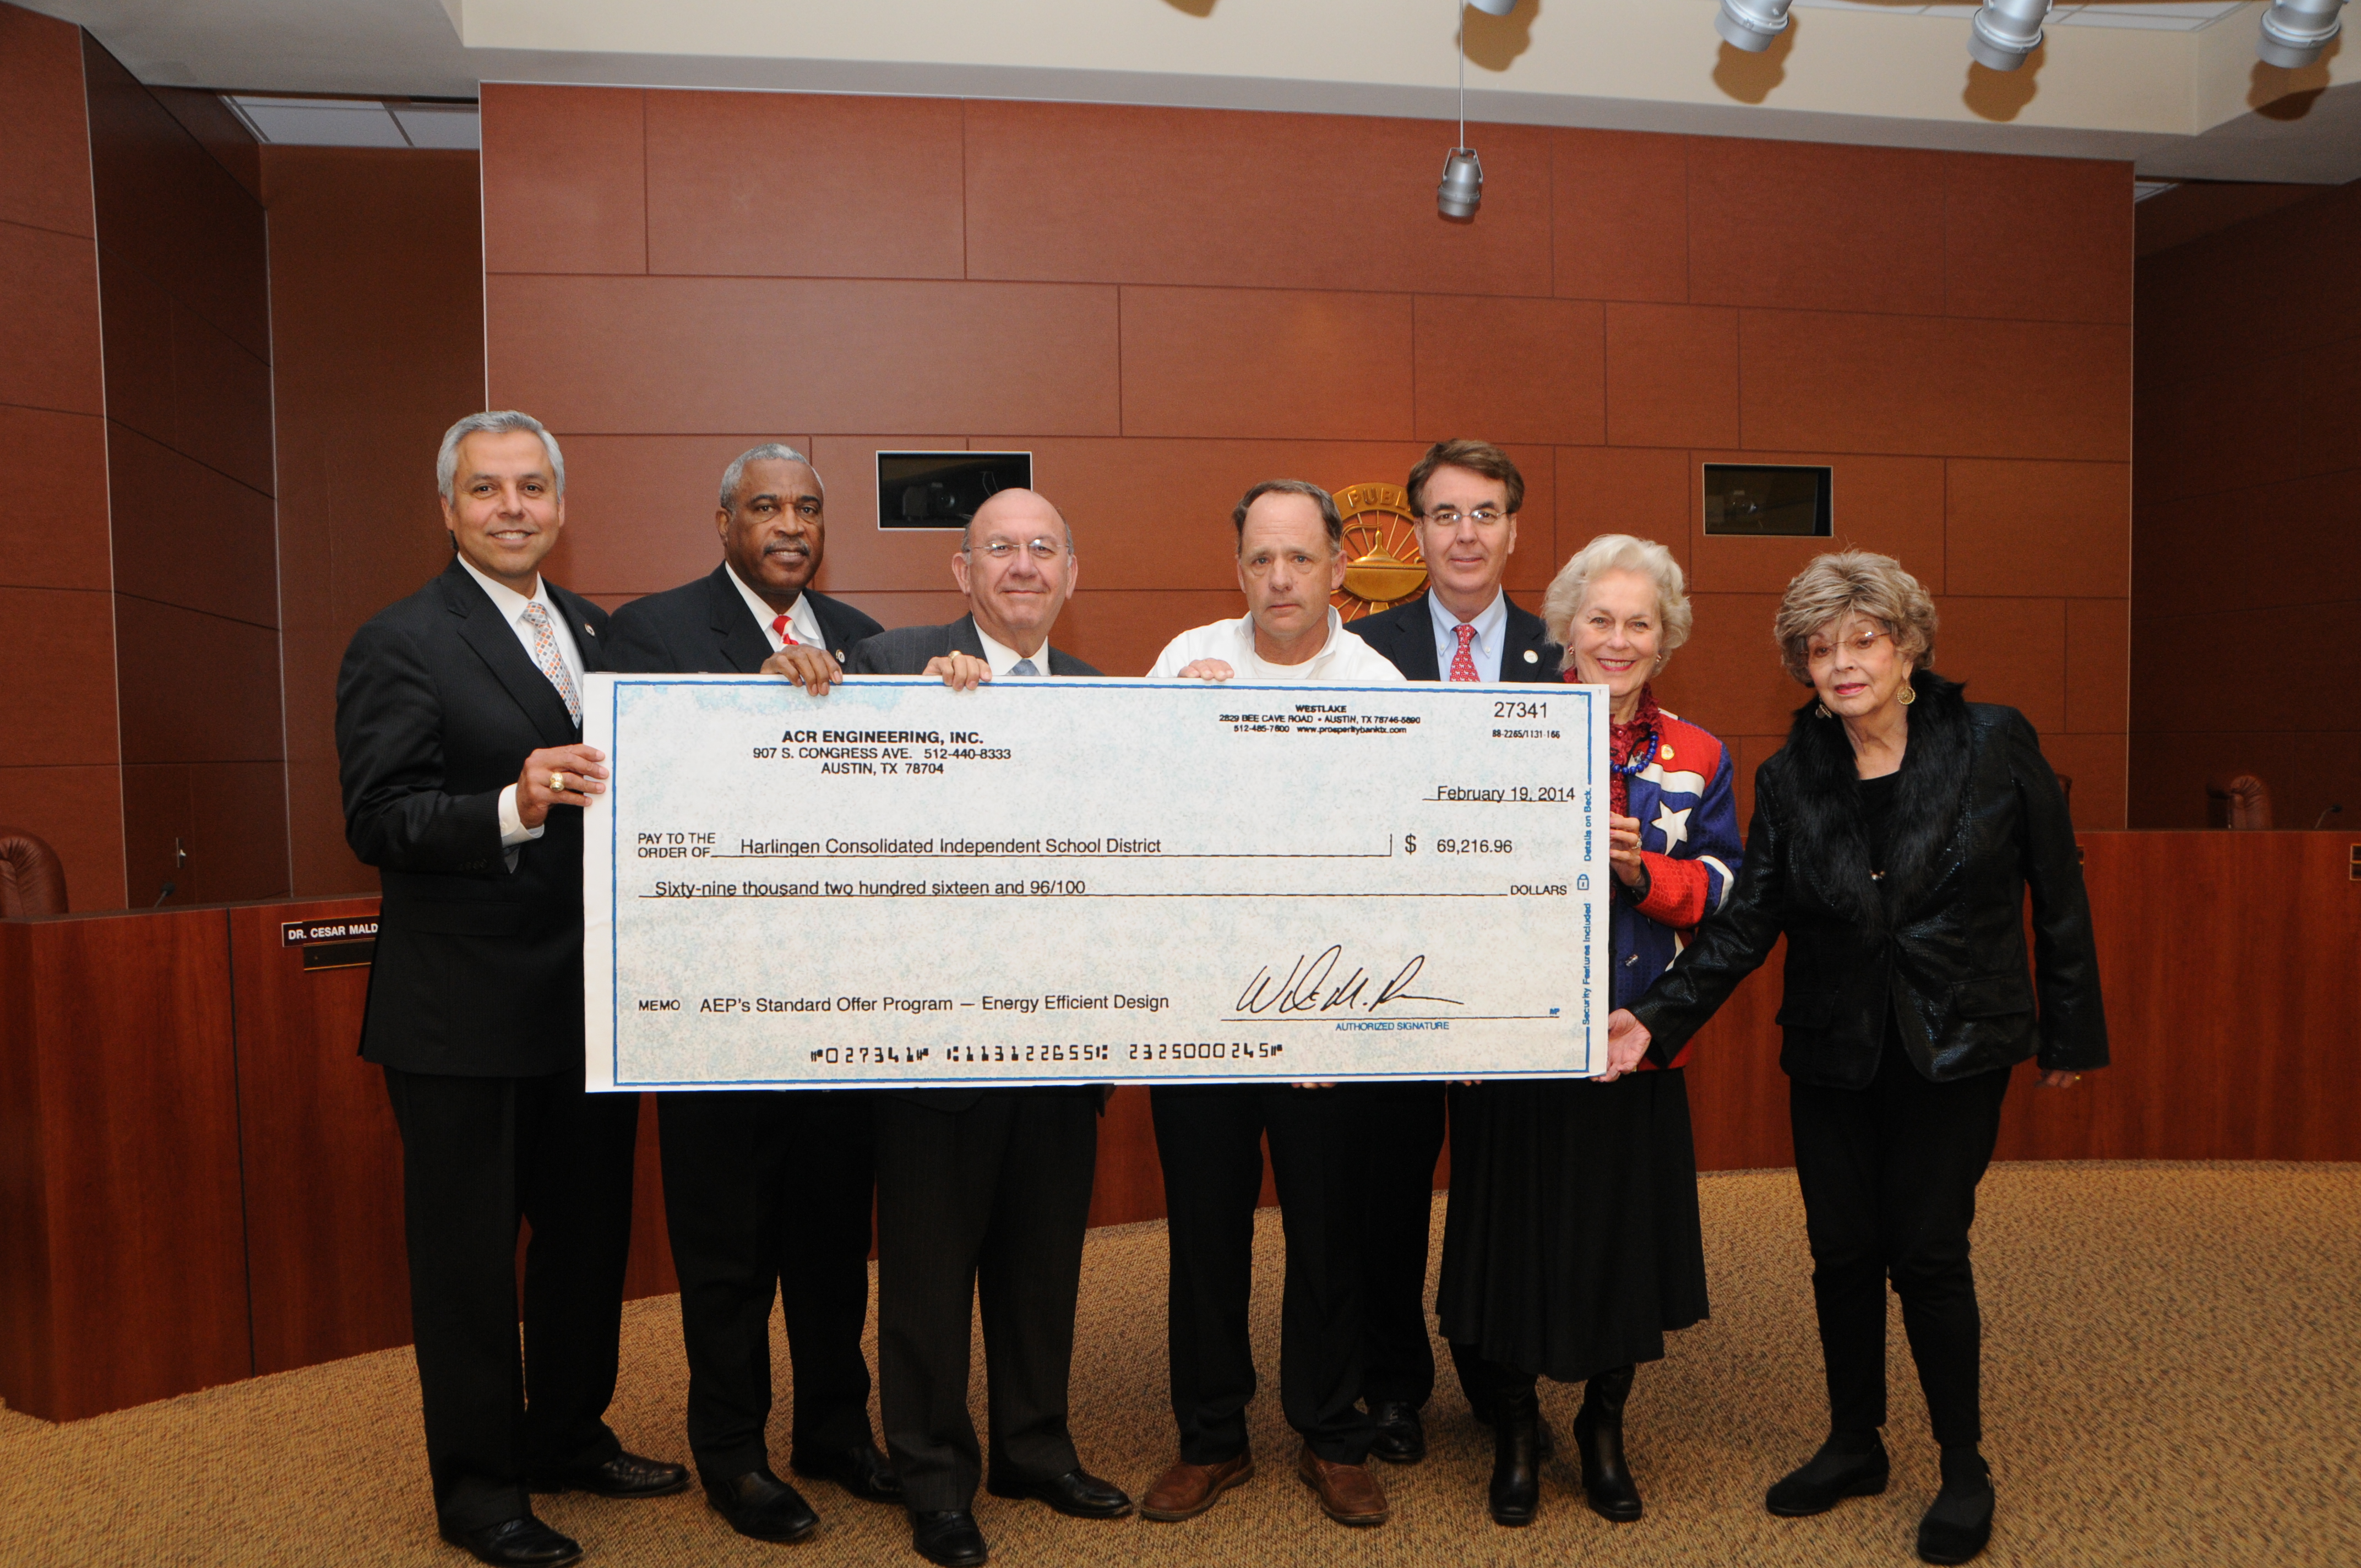 HCISD’s energy conservation leads to $69,216 check presentation